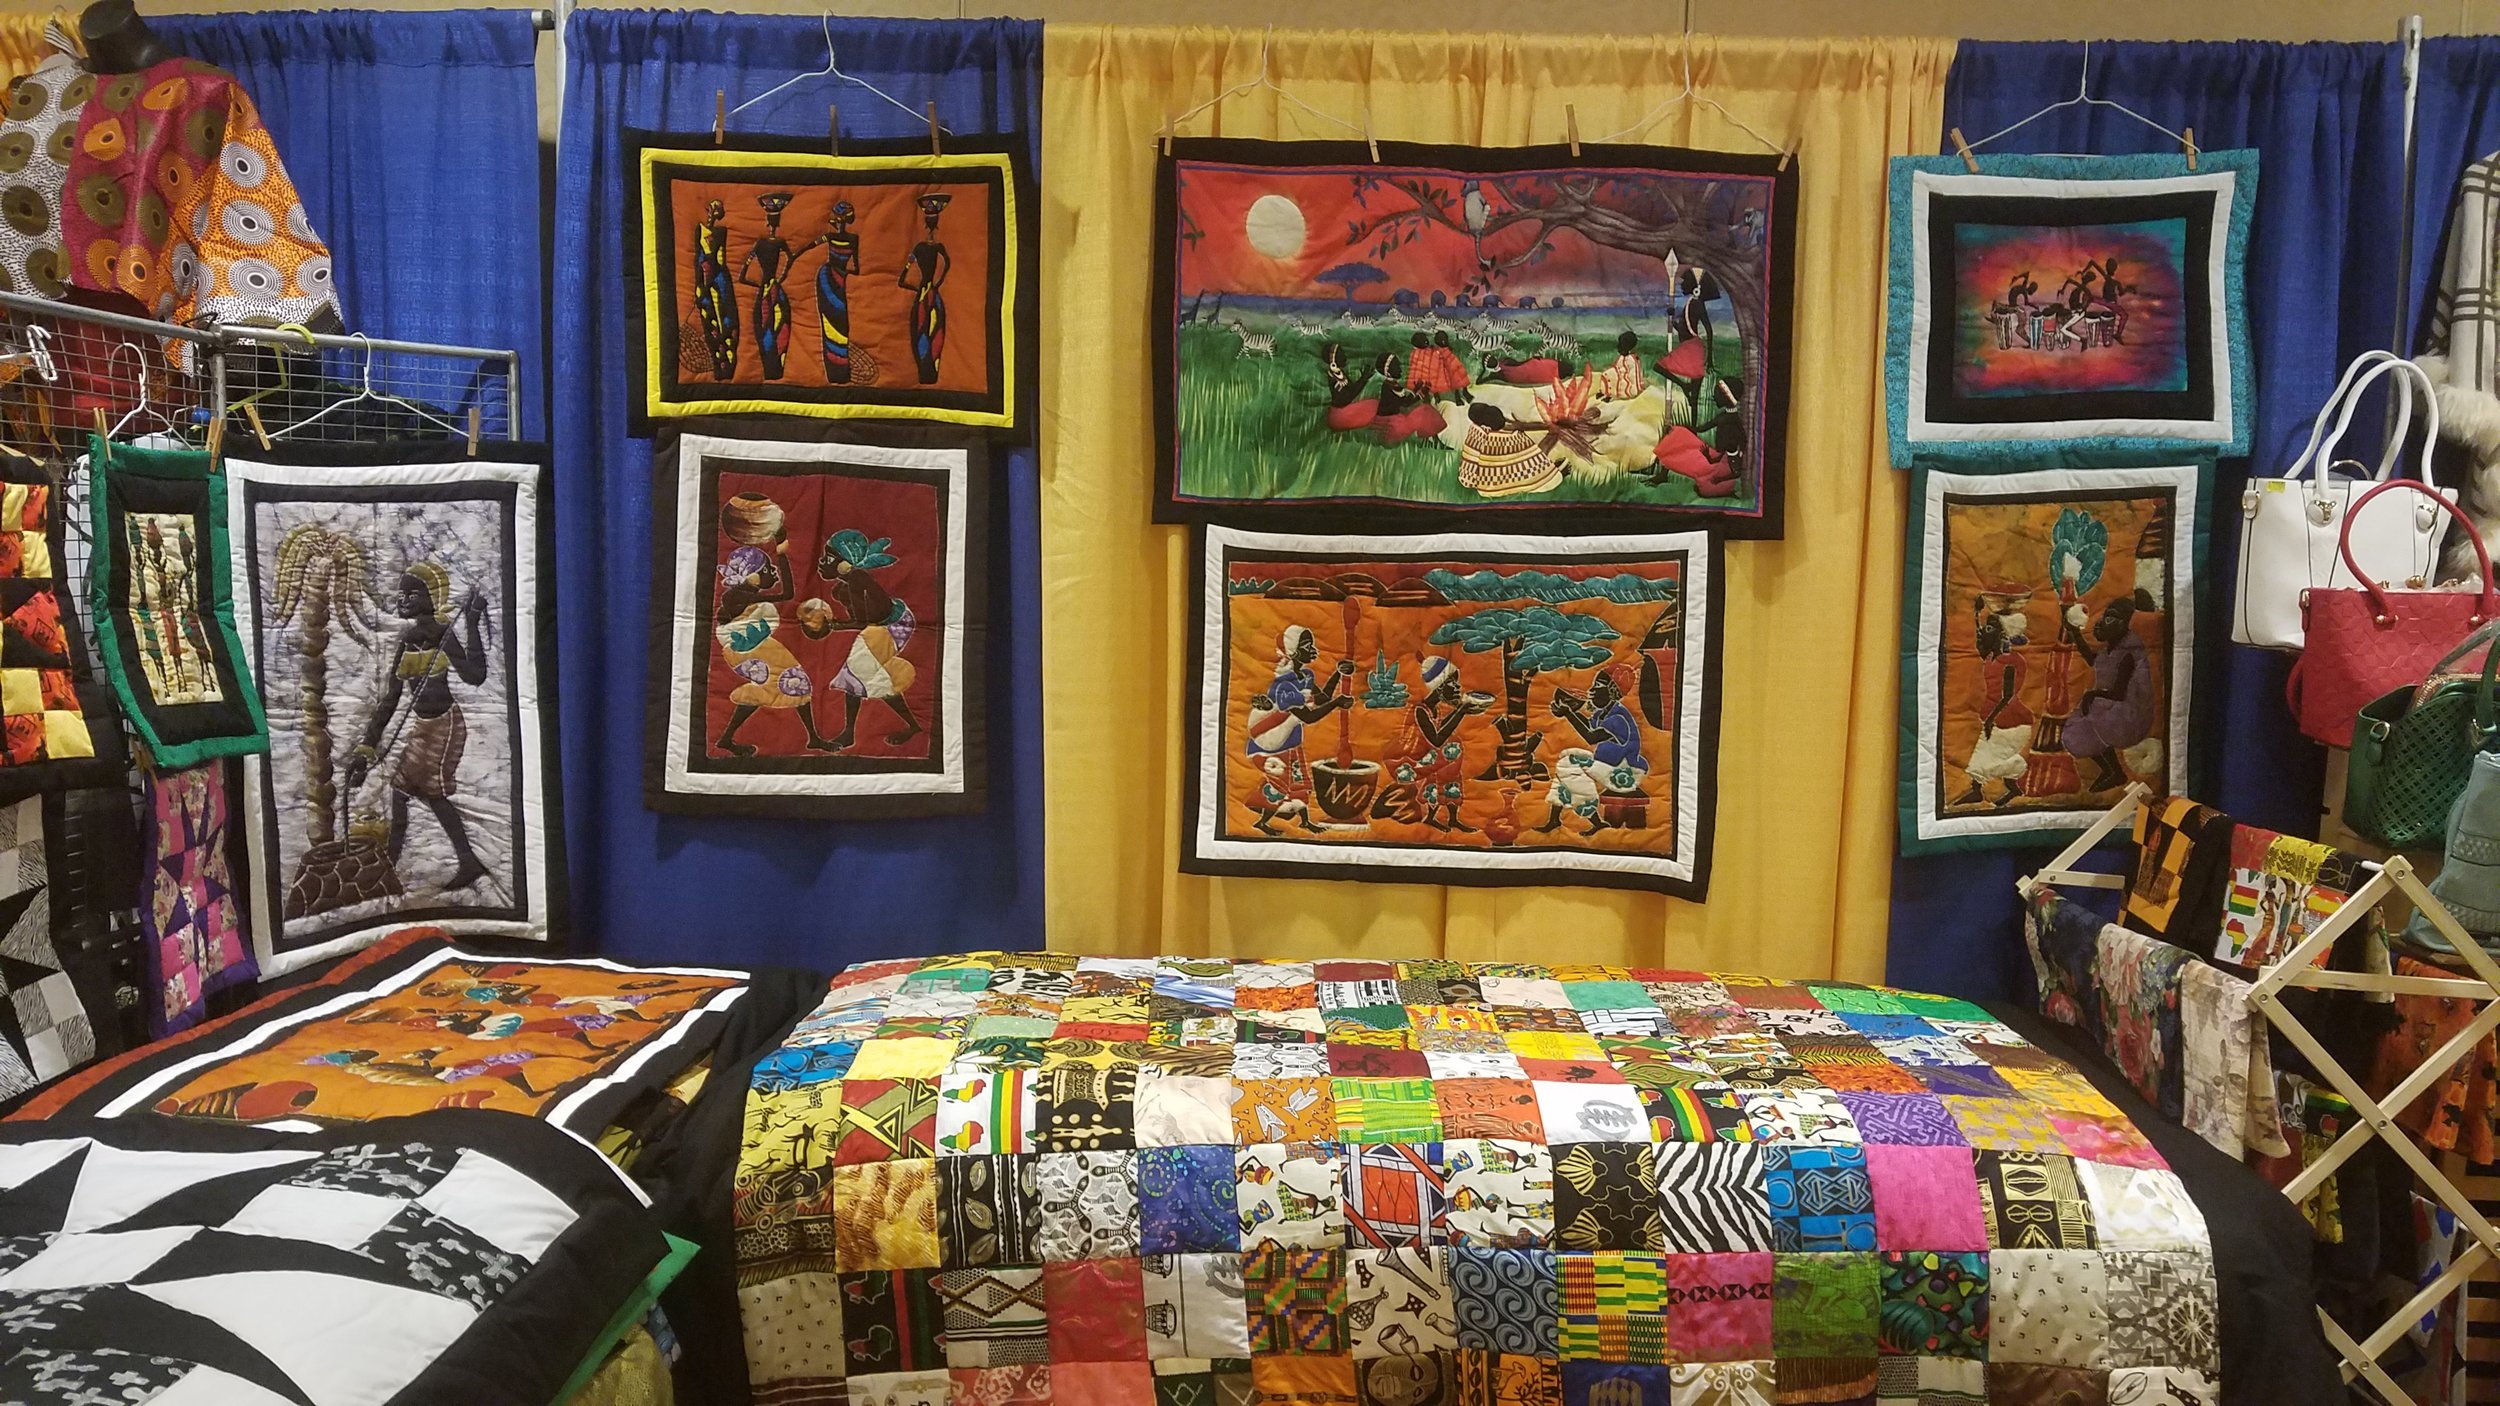 quilt artist Loretta Craig's booth, showing many colorful picture quilts